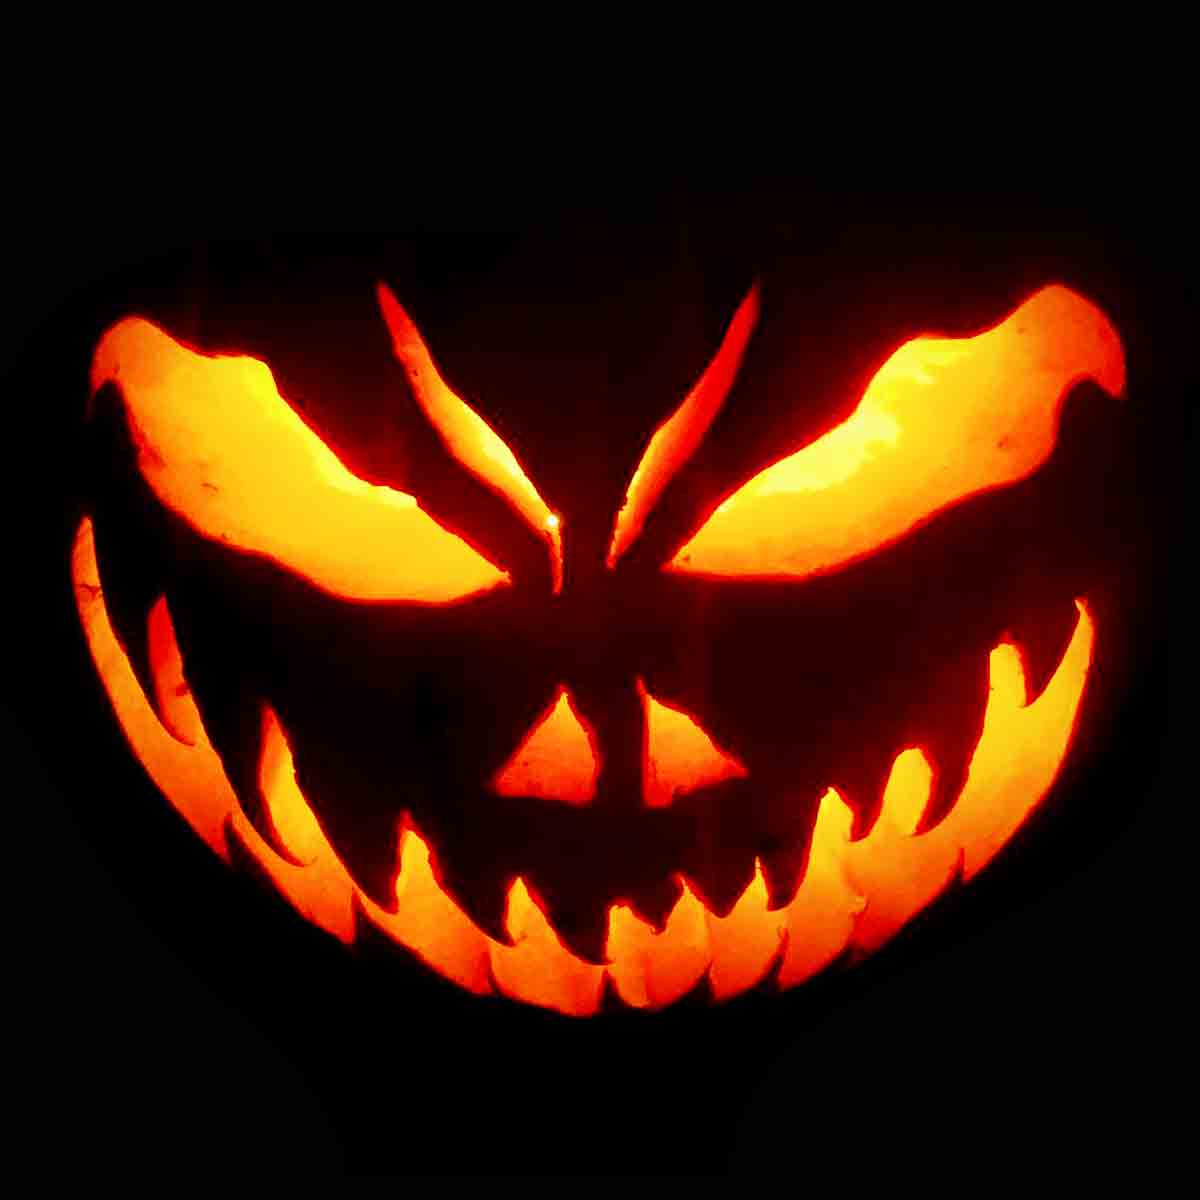 25-halloween-scary-face-pumpkin-carving-ideas-2020-for-kids-adults